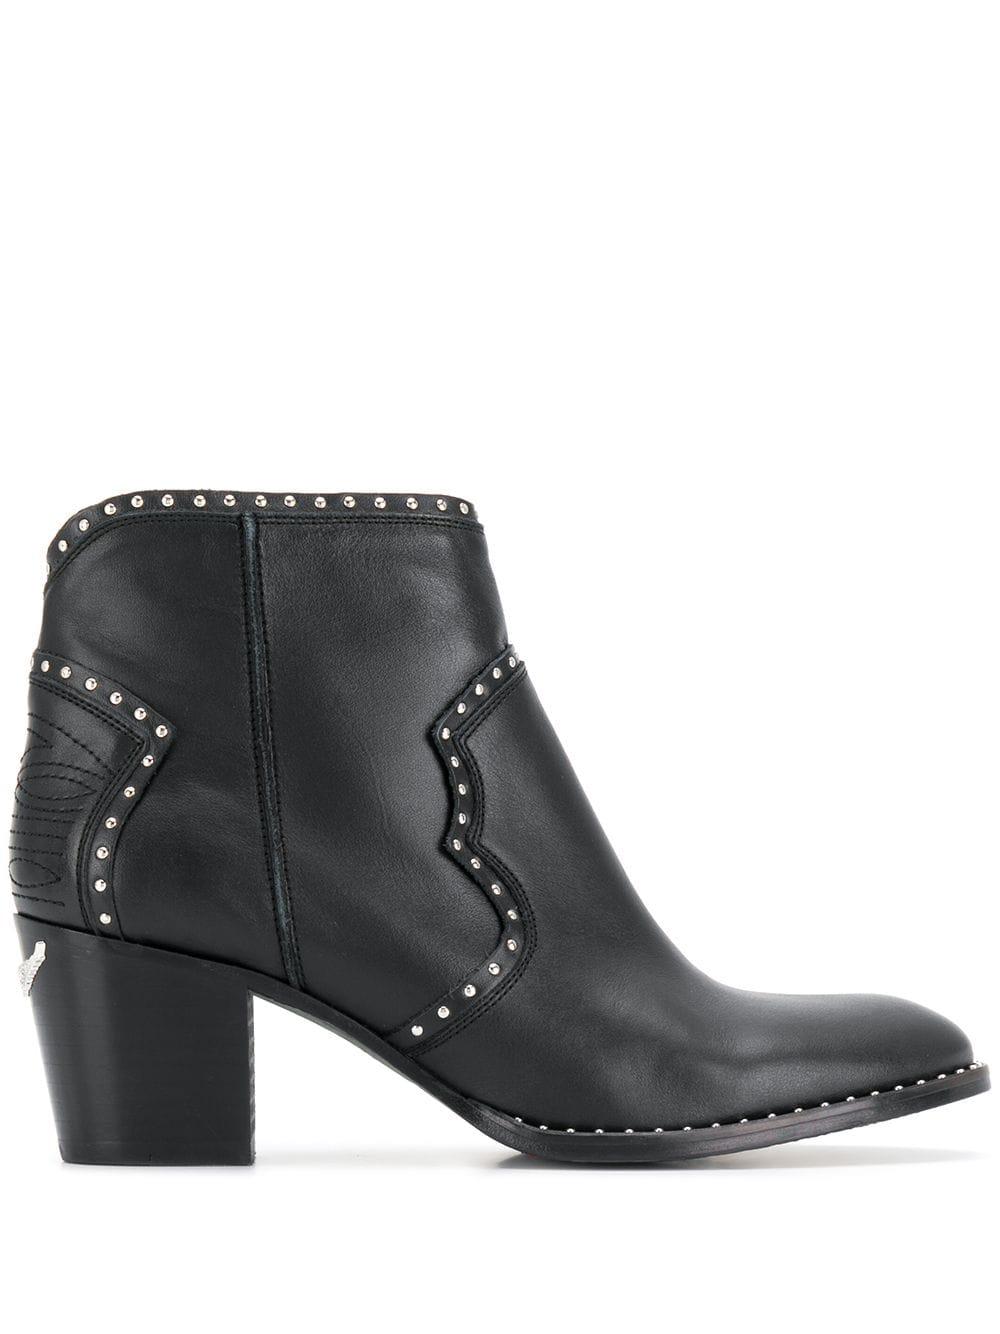 Zadig & Voltaire Molly Studded Boots in Black | Lyst